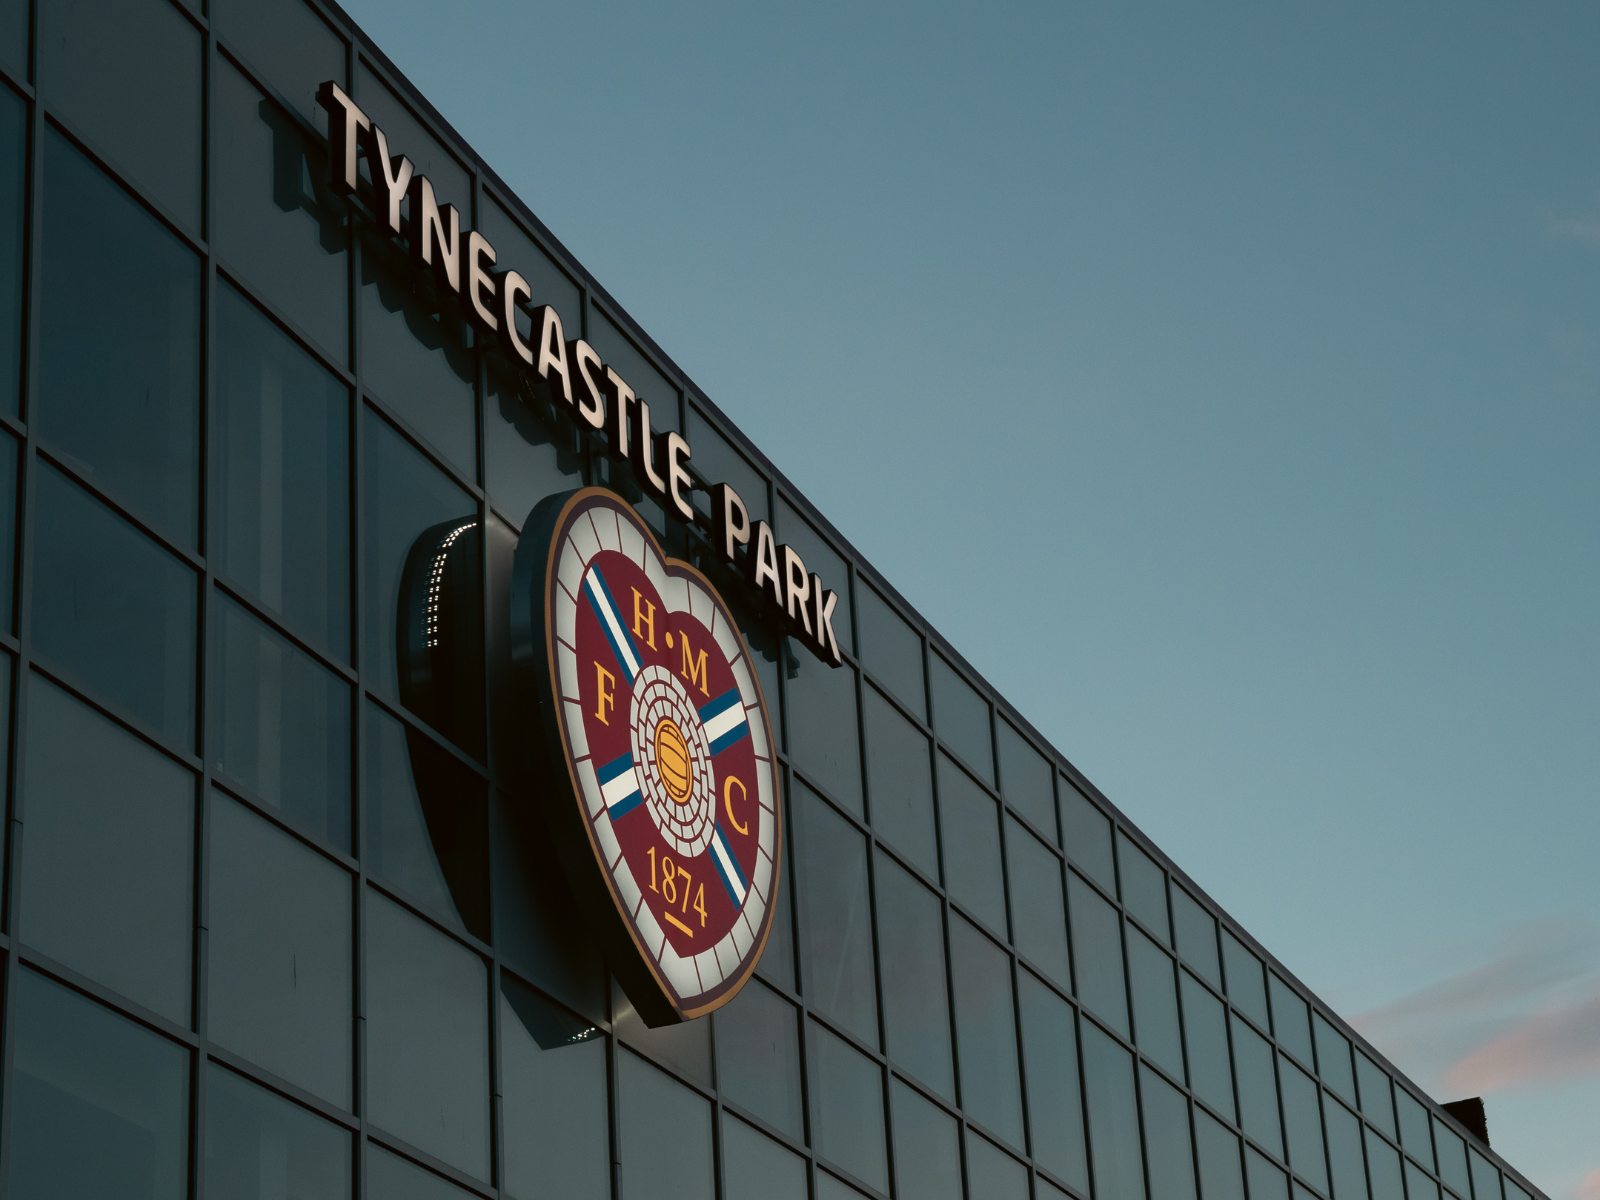  » A Warm Welcome Awaits you at Tynecastle Park